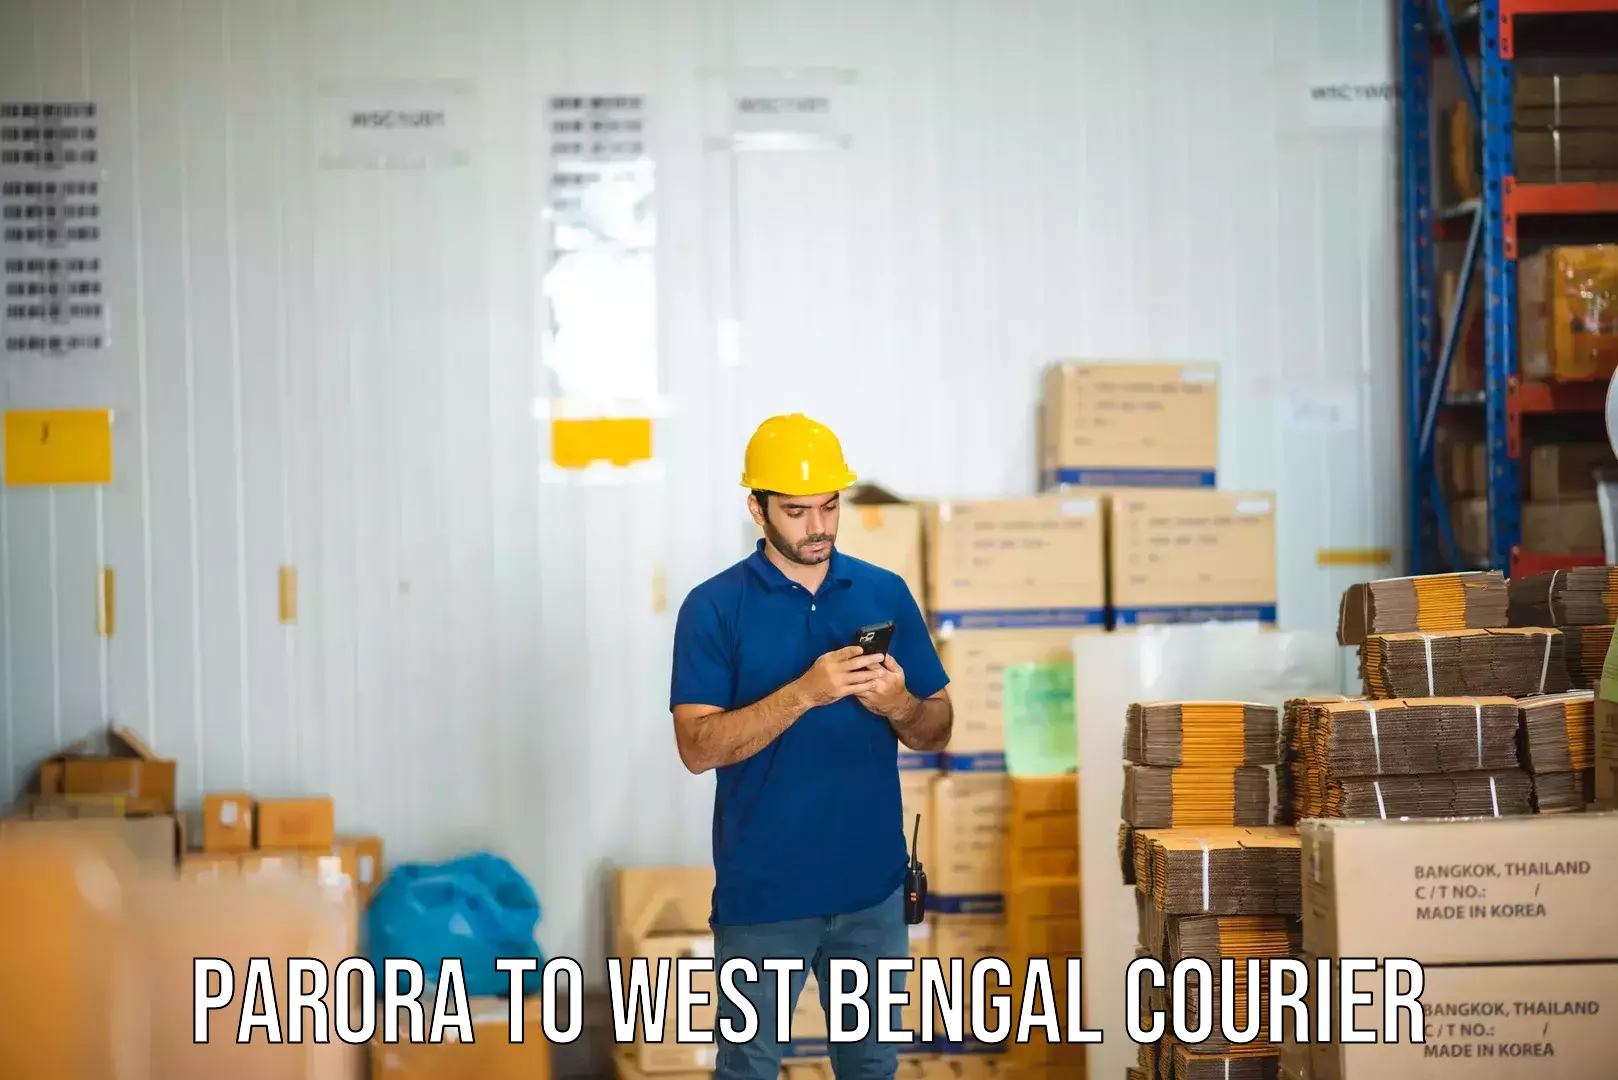 Parcel handling and care Parora to West Bengal